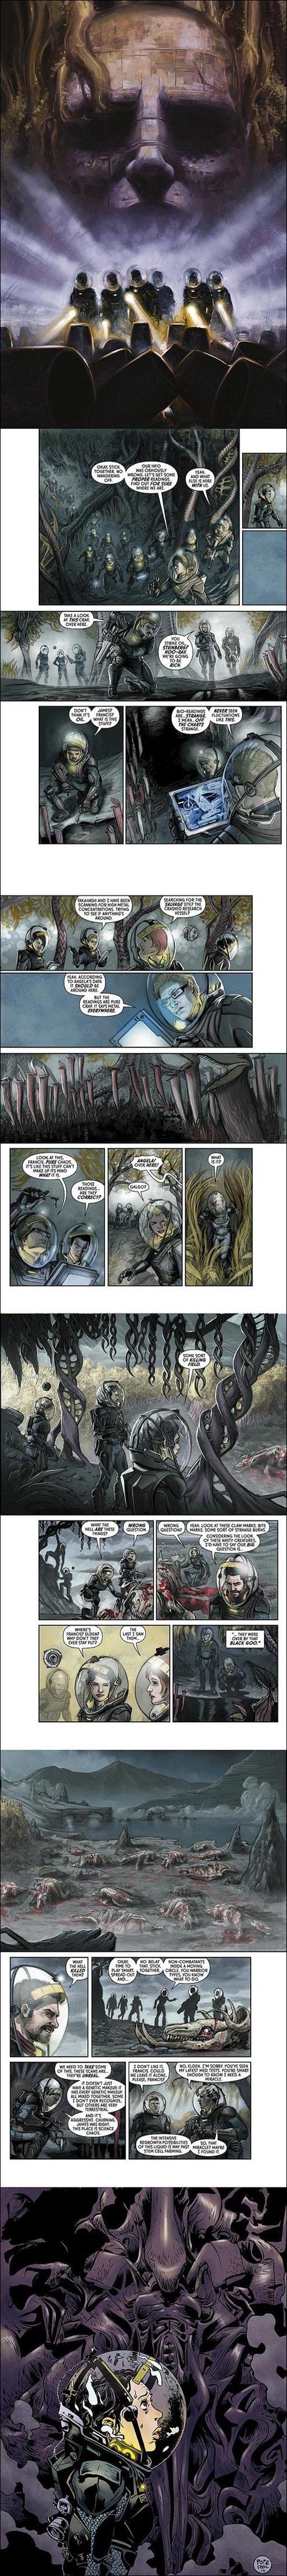 PROMETHEUS: FIRE AND STONE #1 Preview